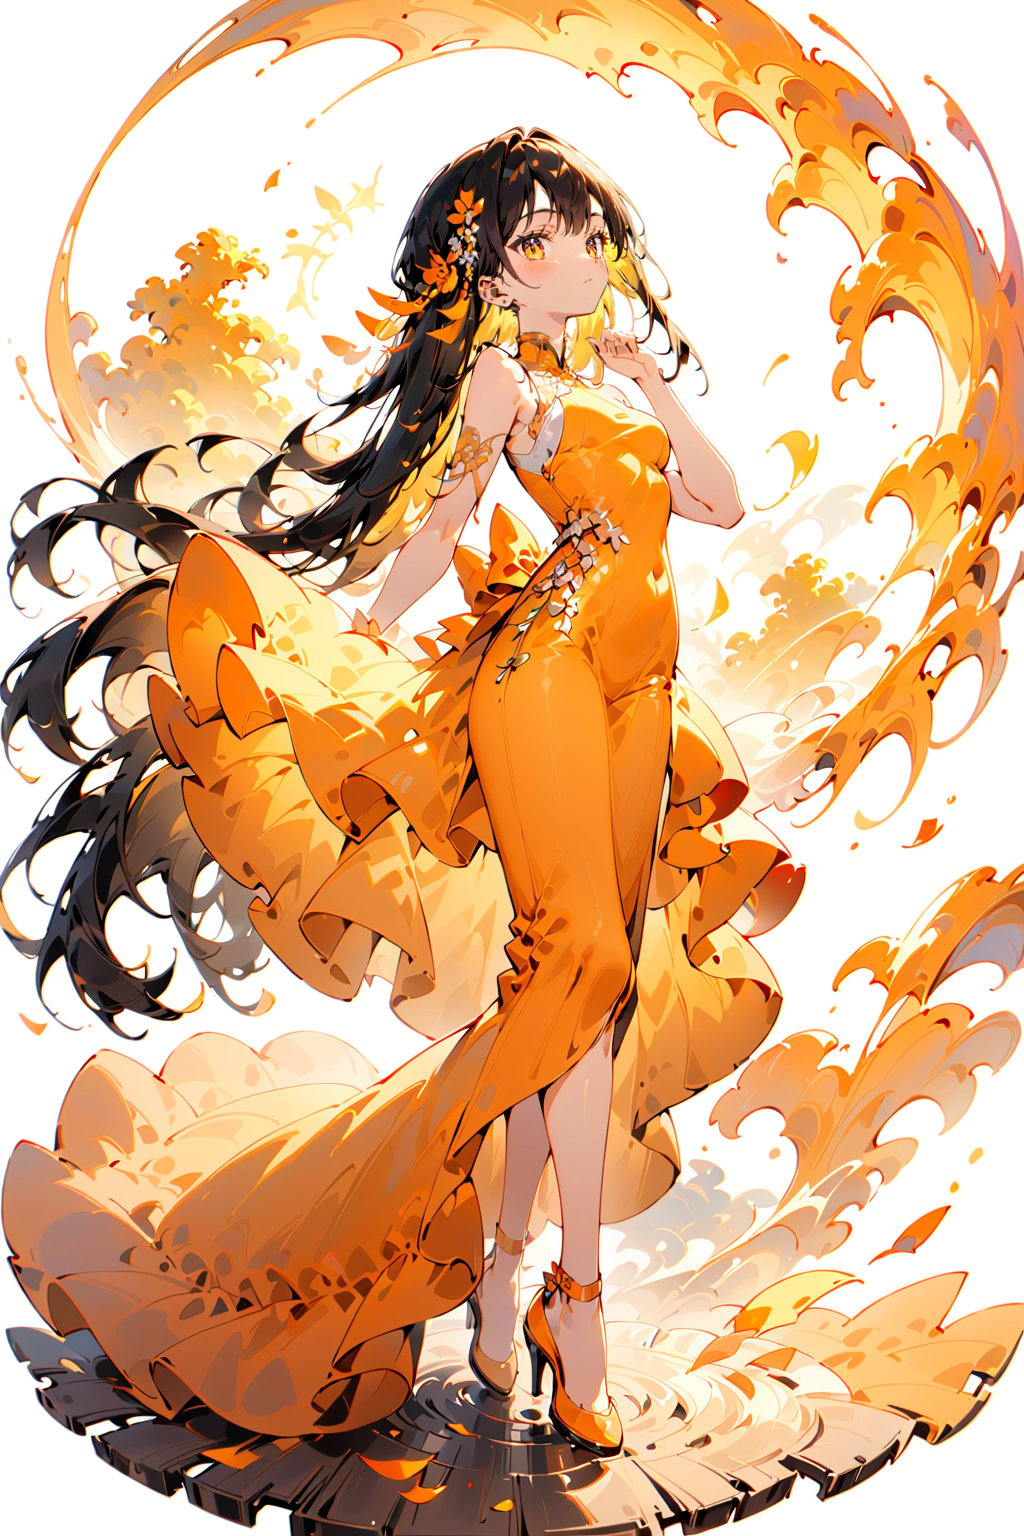 extreme detailed, (masterpiece), (top quality), (best quality), (official art), (beautiful and aesthetic:1.2), (stylish pose), (1 woman), (colorful), (orange-white theme: 1.5), ppcp, medium length skirt, 	looking into distance, long wave black hair, 
perfect,ChineseWatercolorPainting,Chromaspots,fairy